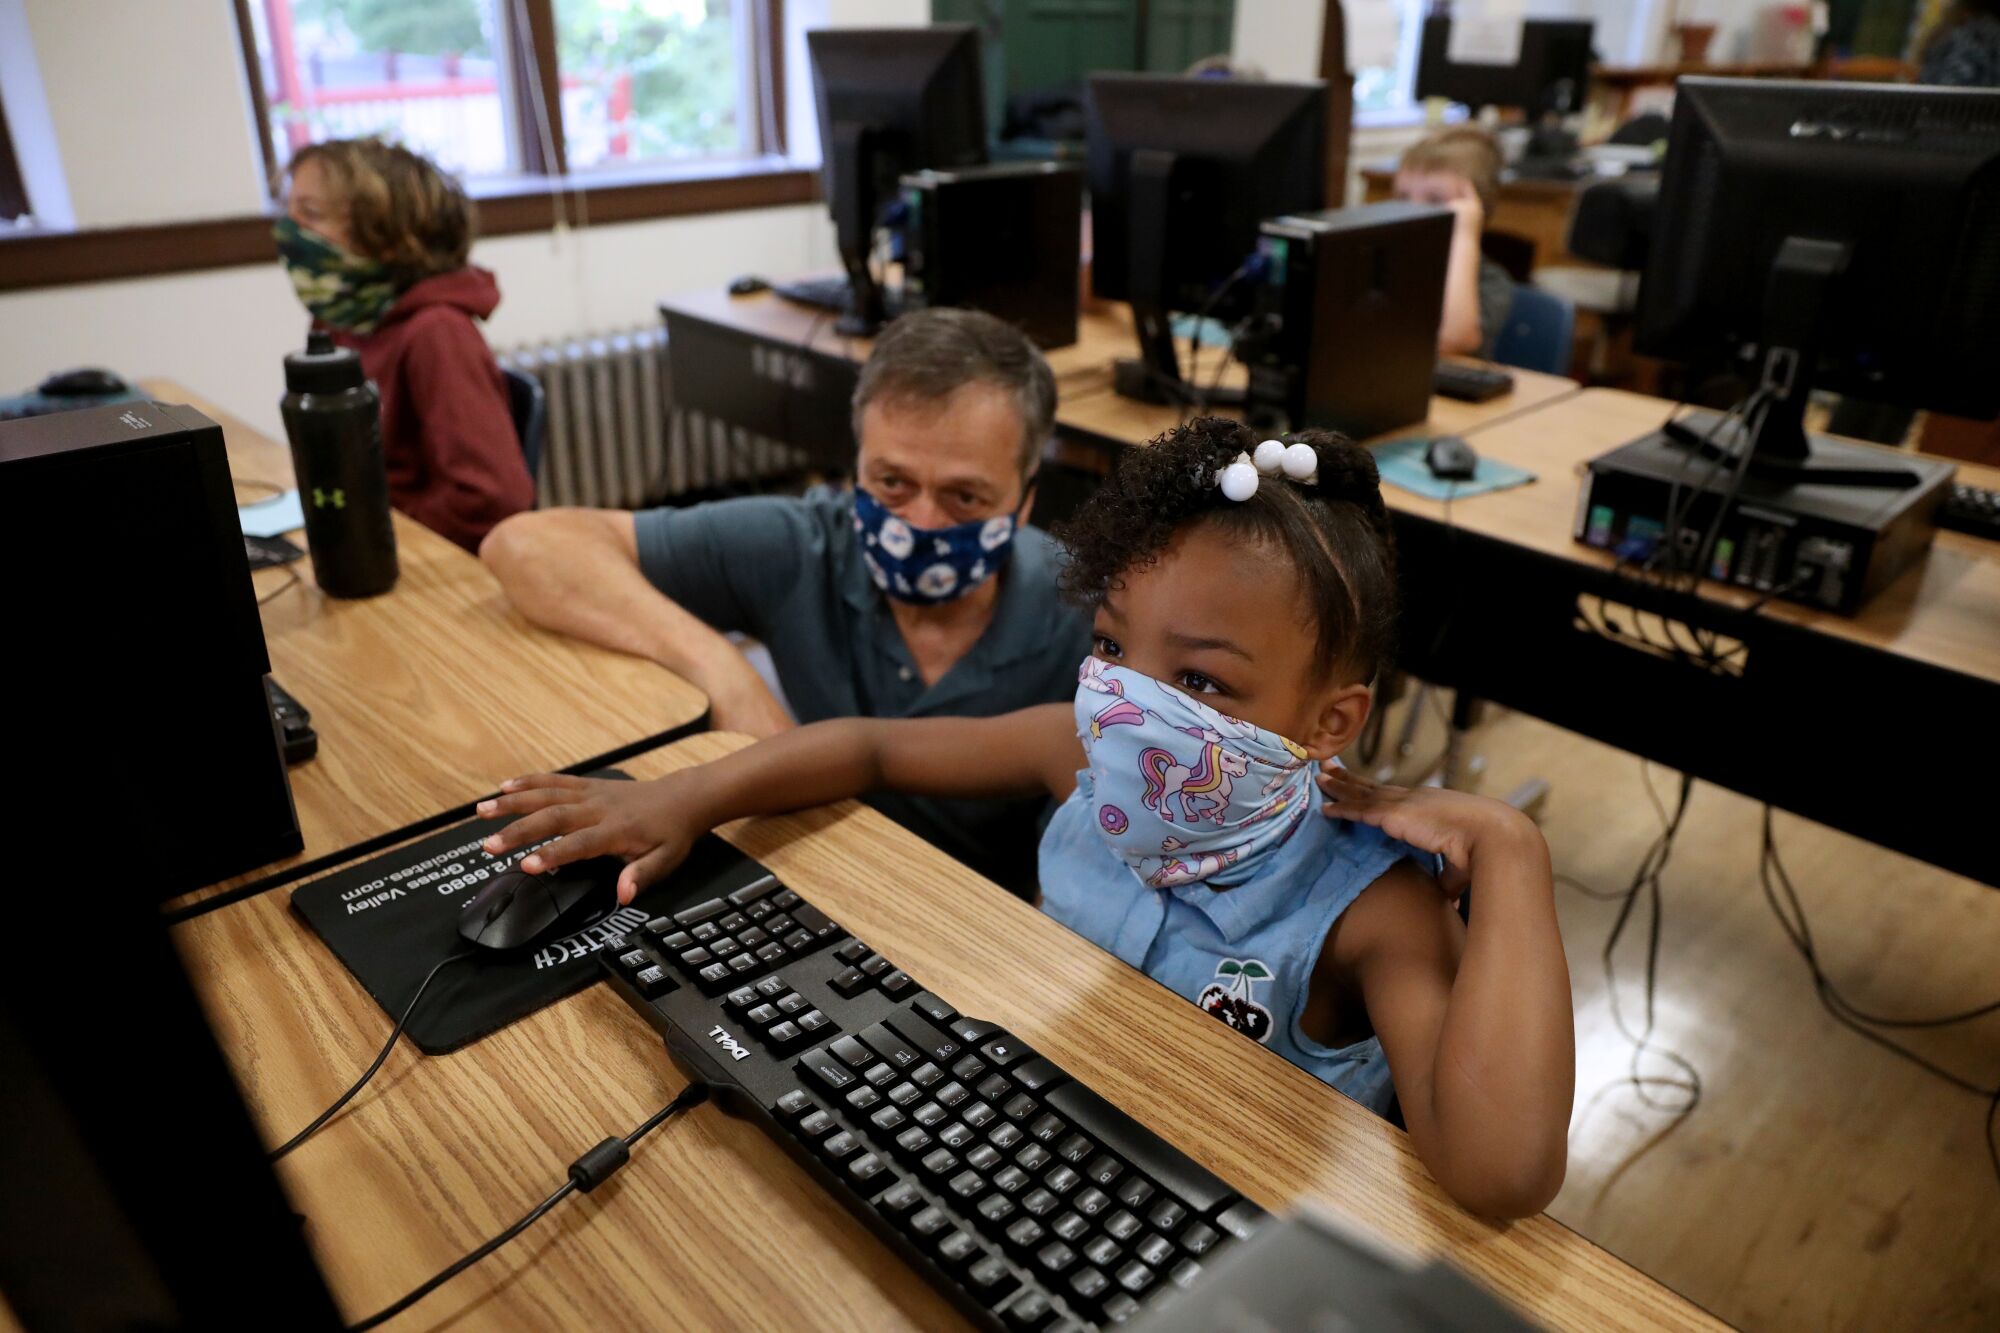 China Arkansas, 8, an incoming third-grader, takes an assessment test while David Pistone, a teacher, looks on.